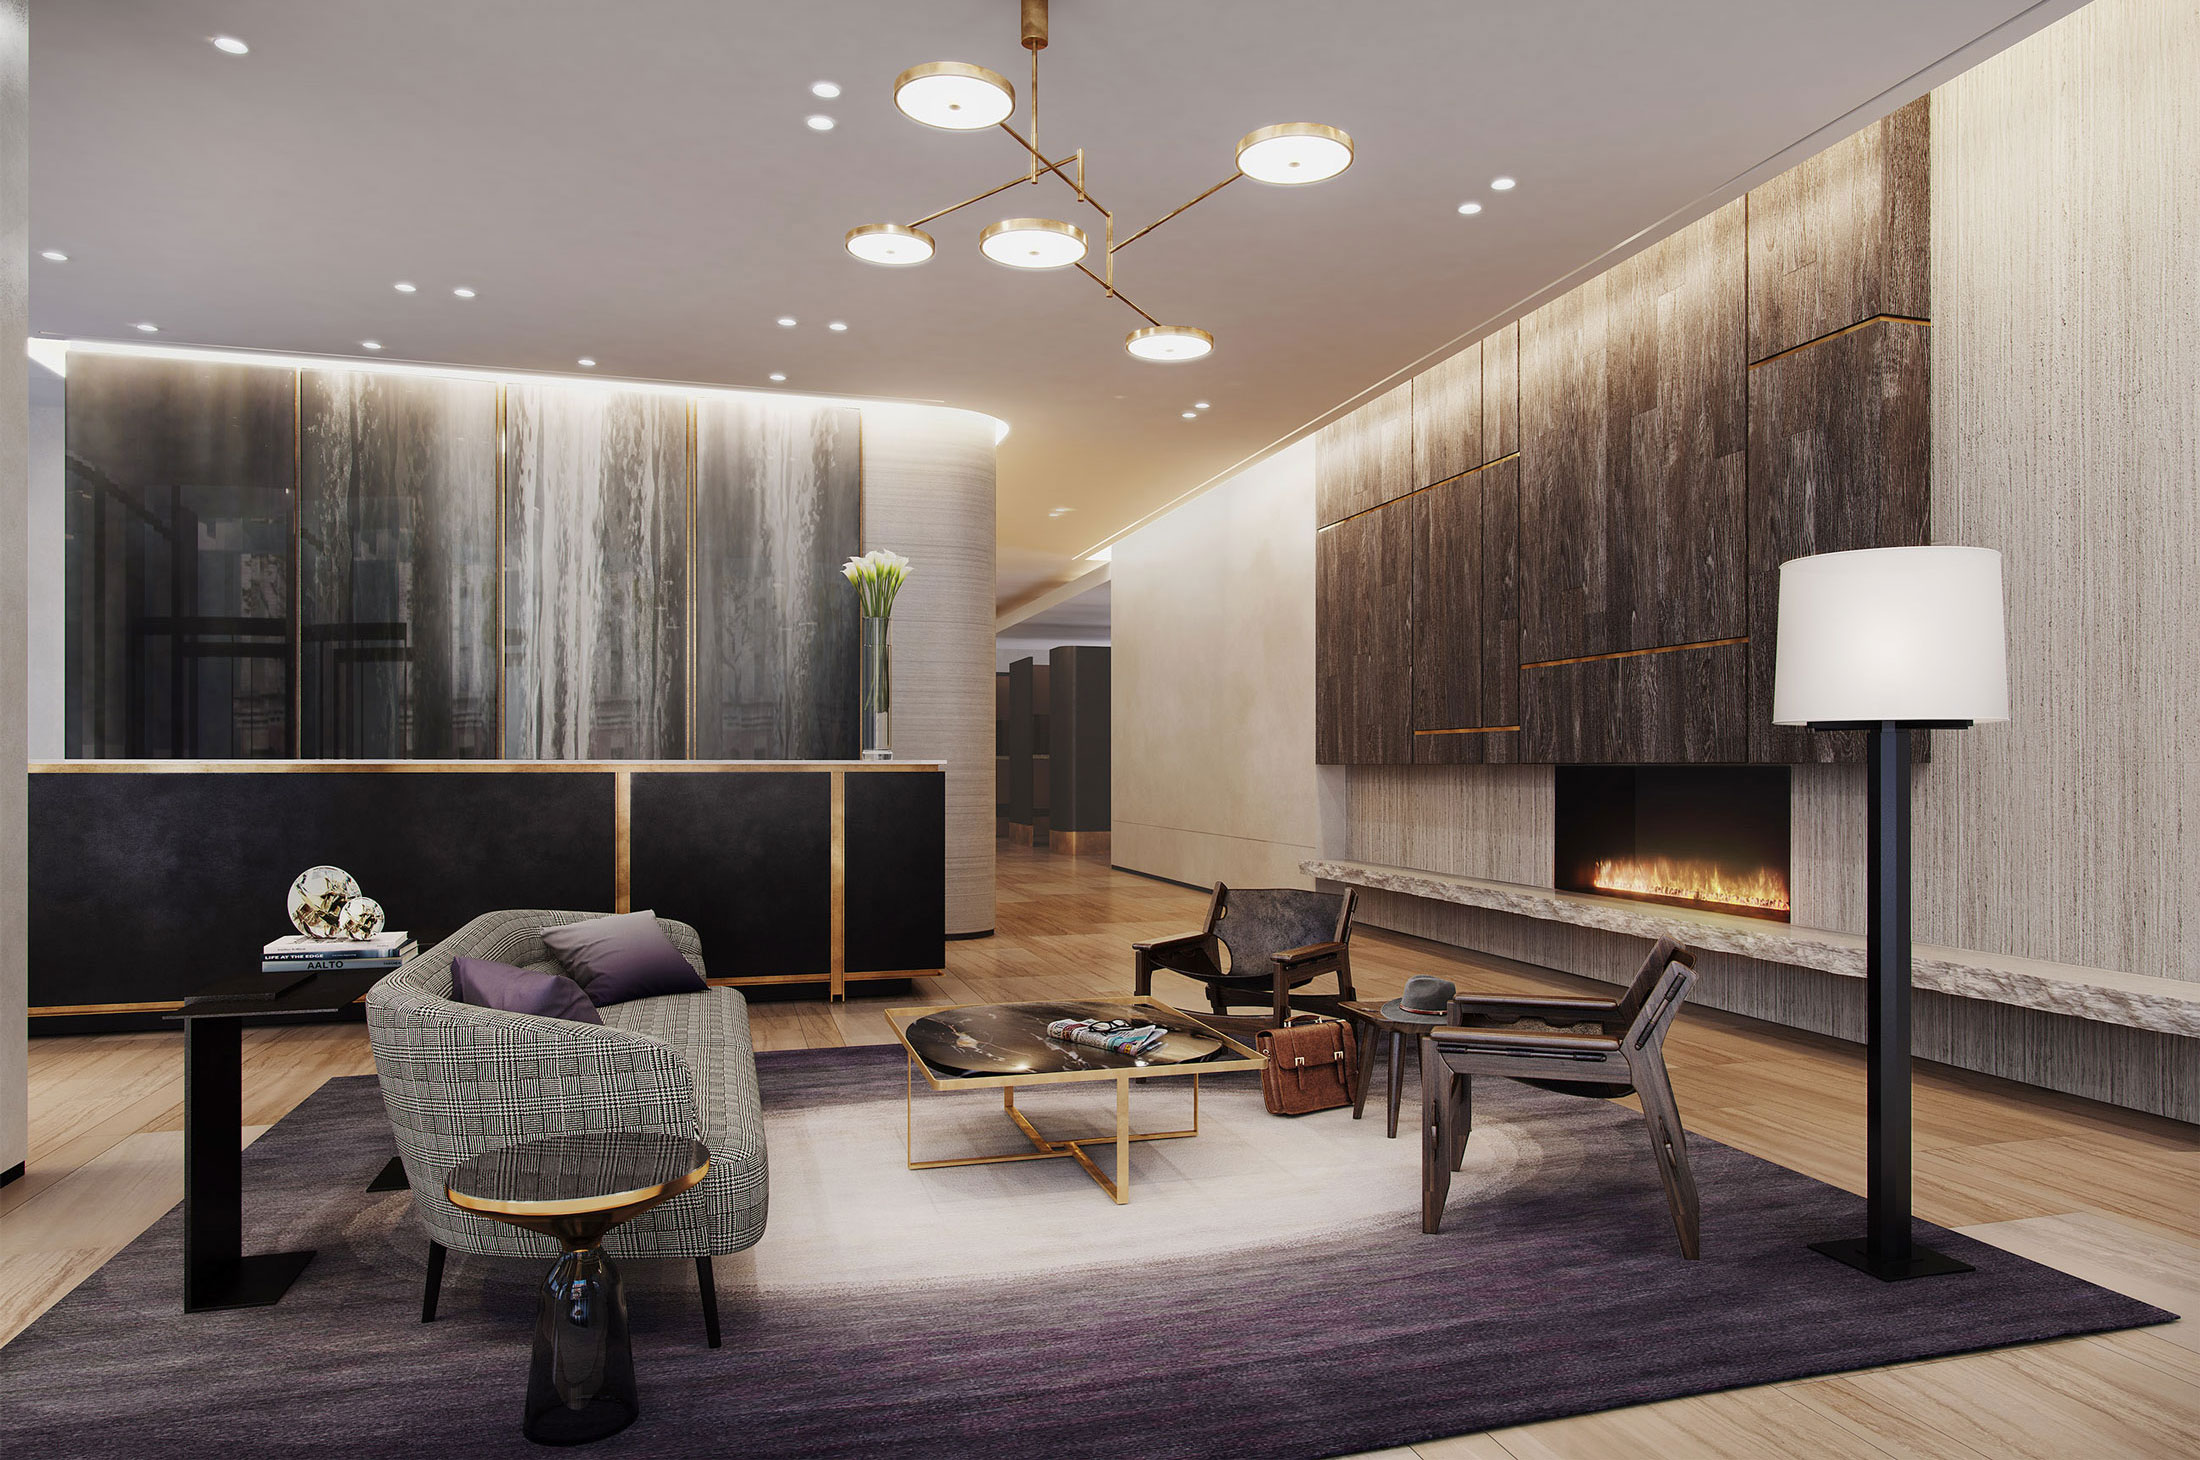 Architectural Rendering of the interior of the 456 Washington Street project located in Tribeca, New York City